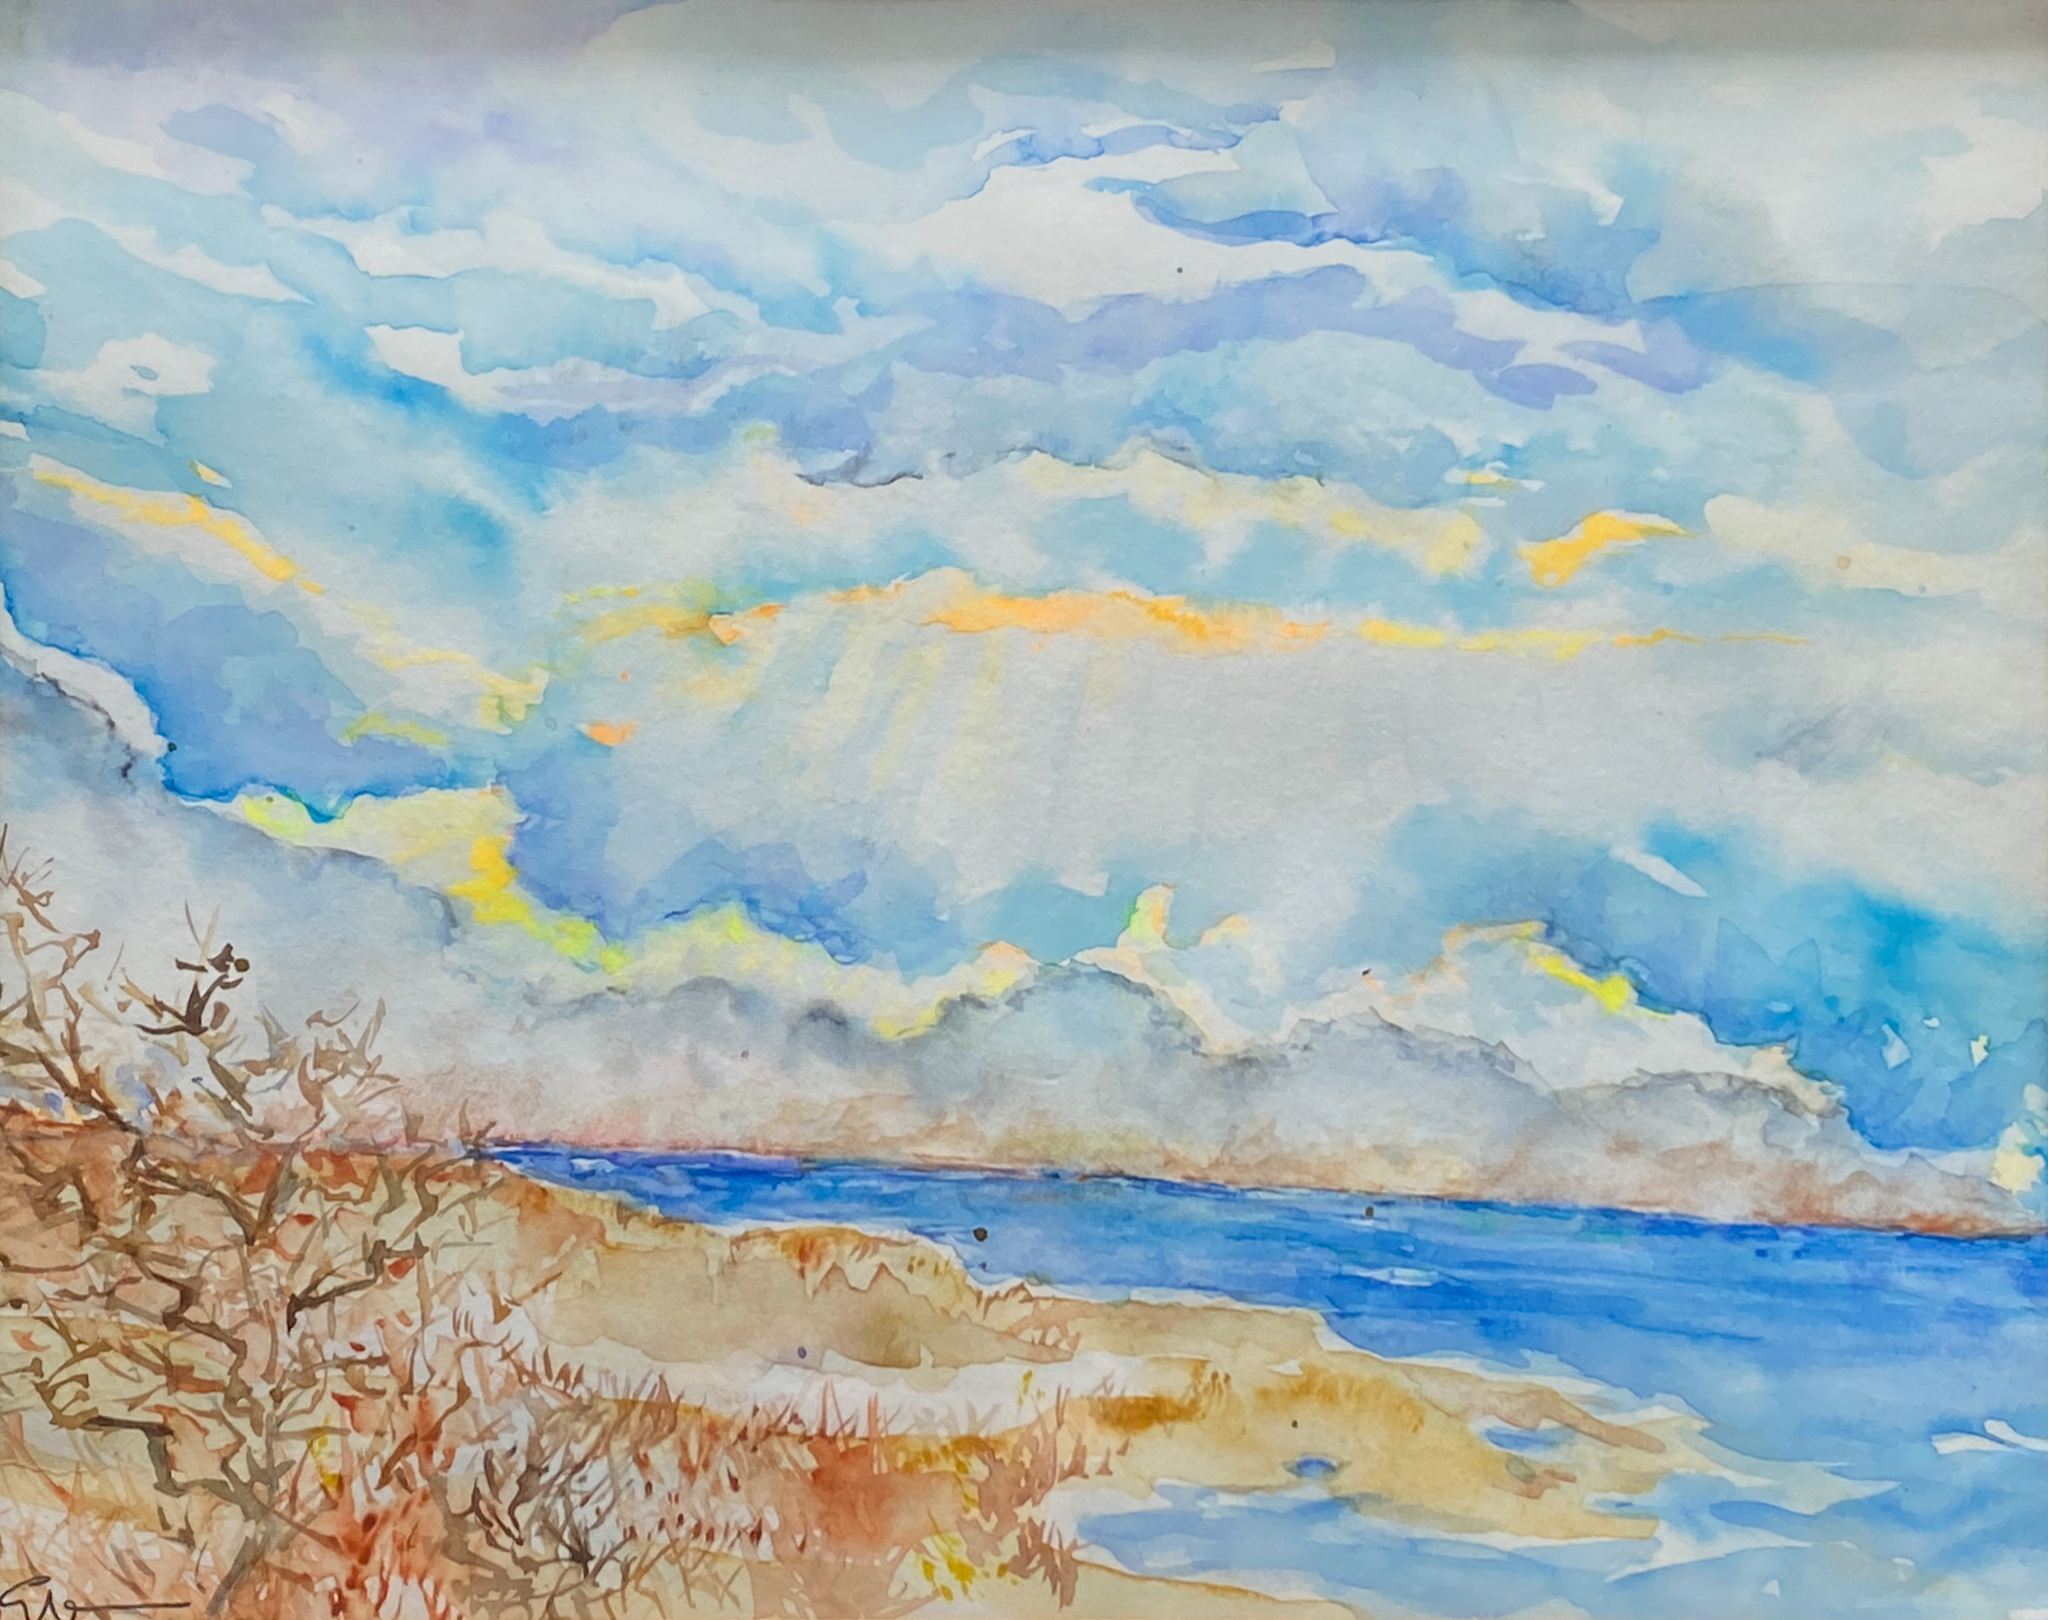 Spring Buds — Her studio is built high behind her house and every window has an interesting view. This is the view south towards the Aldernay Point. The vegetation struggles here because of the wind and the cold, but it’s hearty. This watercolour captures that sense of spring coming but not here, yet.